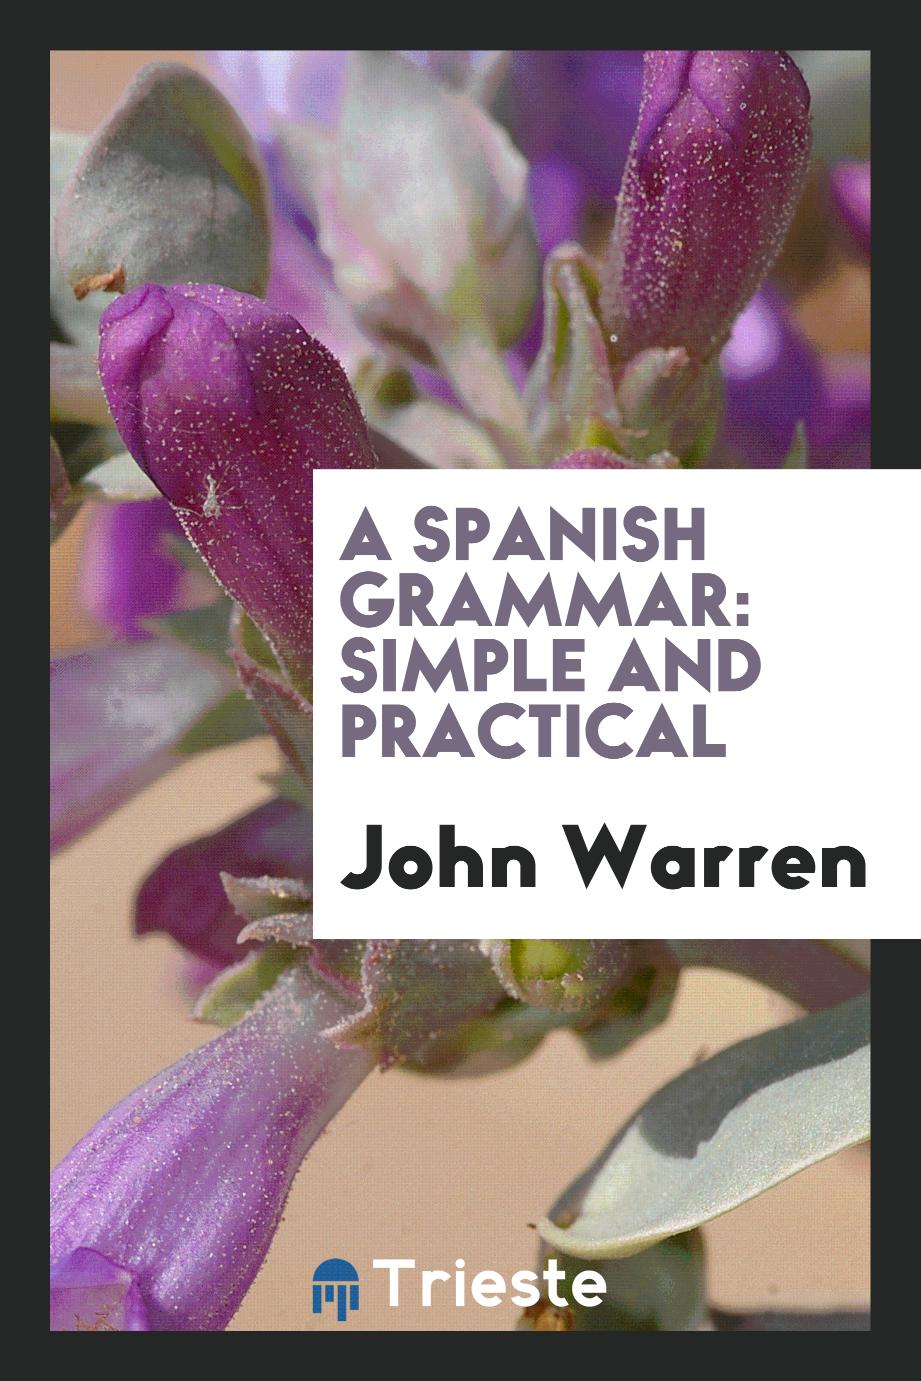 A Spanish grammar: simple and practical